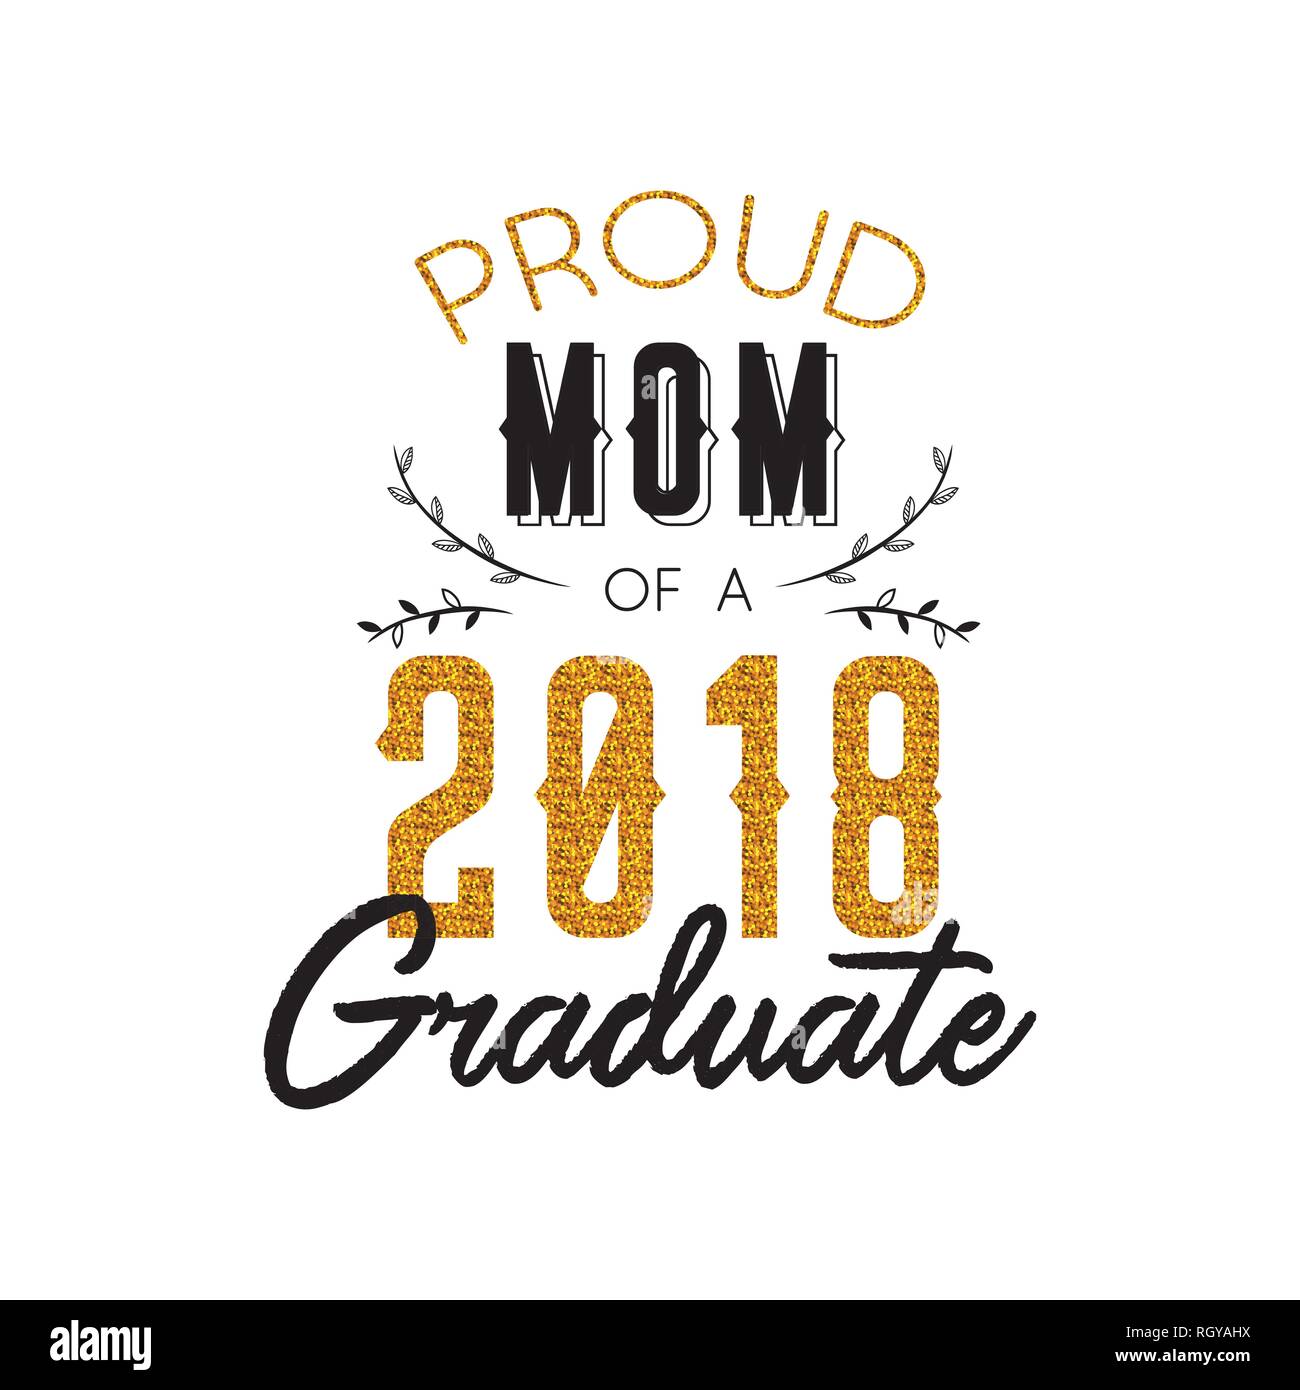 Graduation wishes overlays, lettering labels design. Template for graduation design, t-shirt, high school or college graduate, yearbook. Modern callig Stock Vector